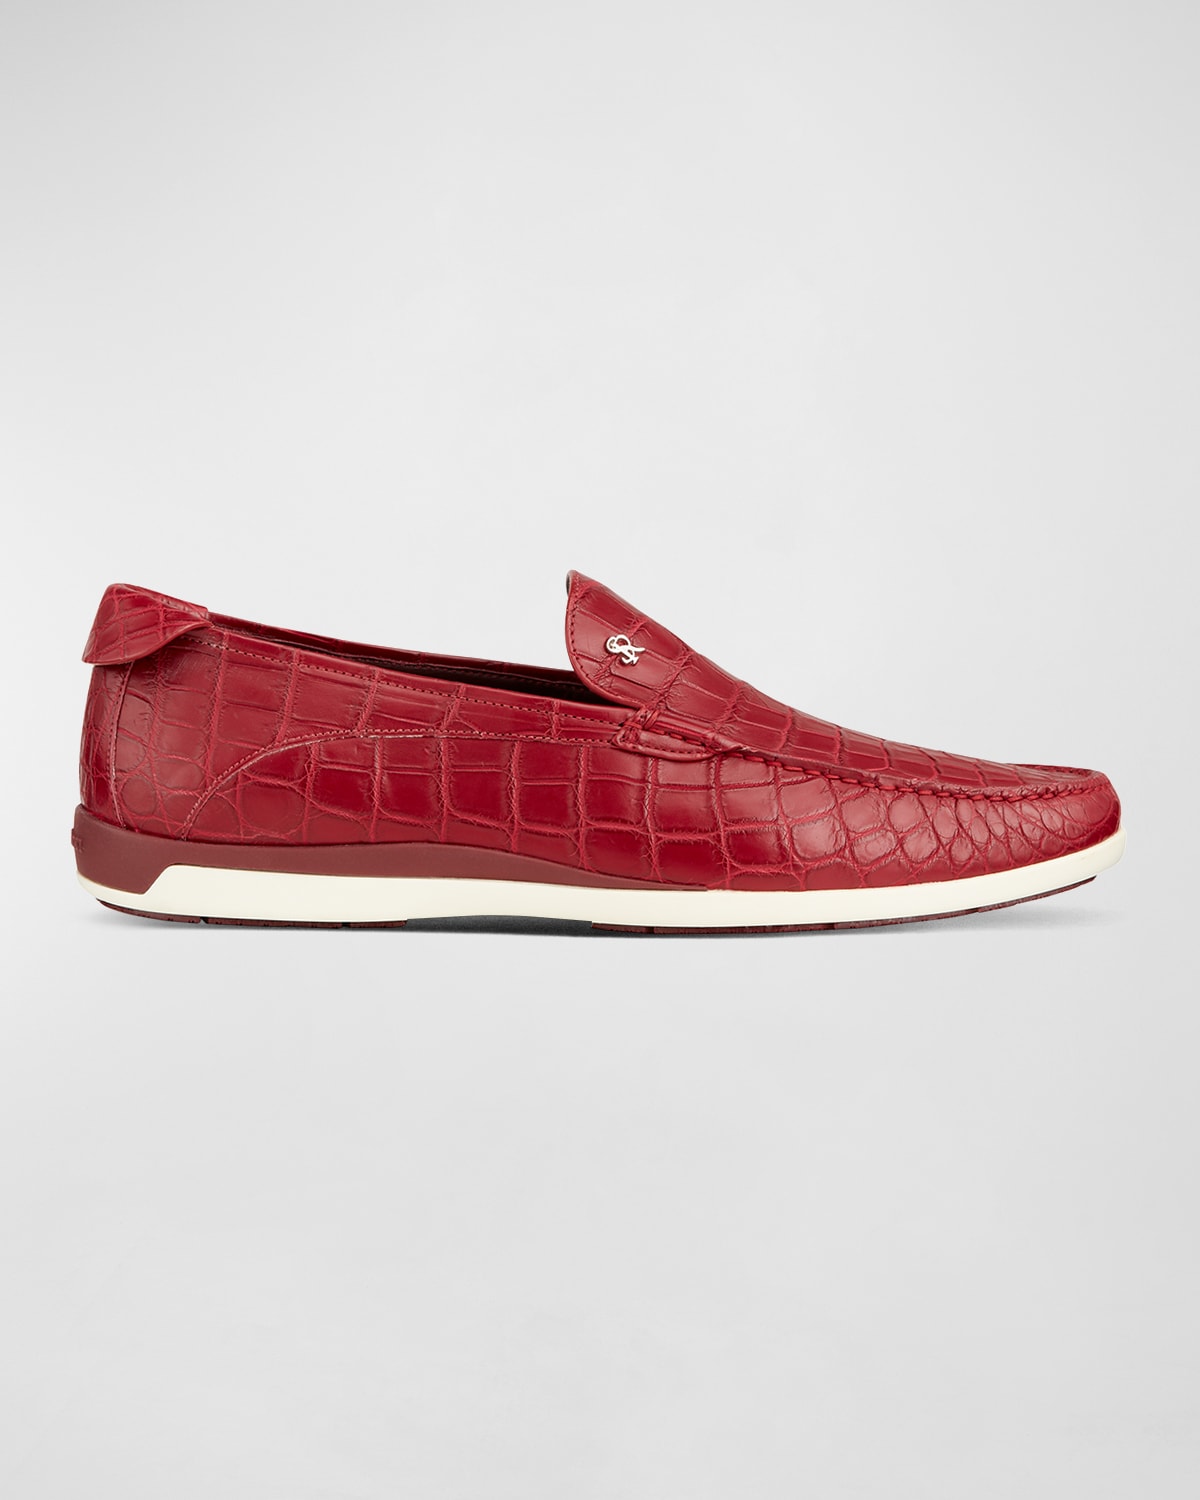 Stefano Ricci Men's Crocodile Leather Loafers In Red